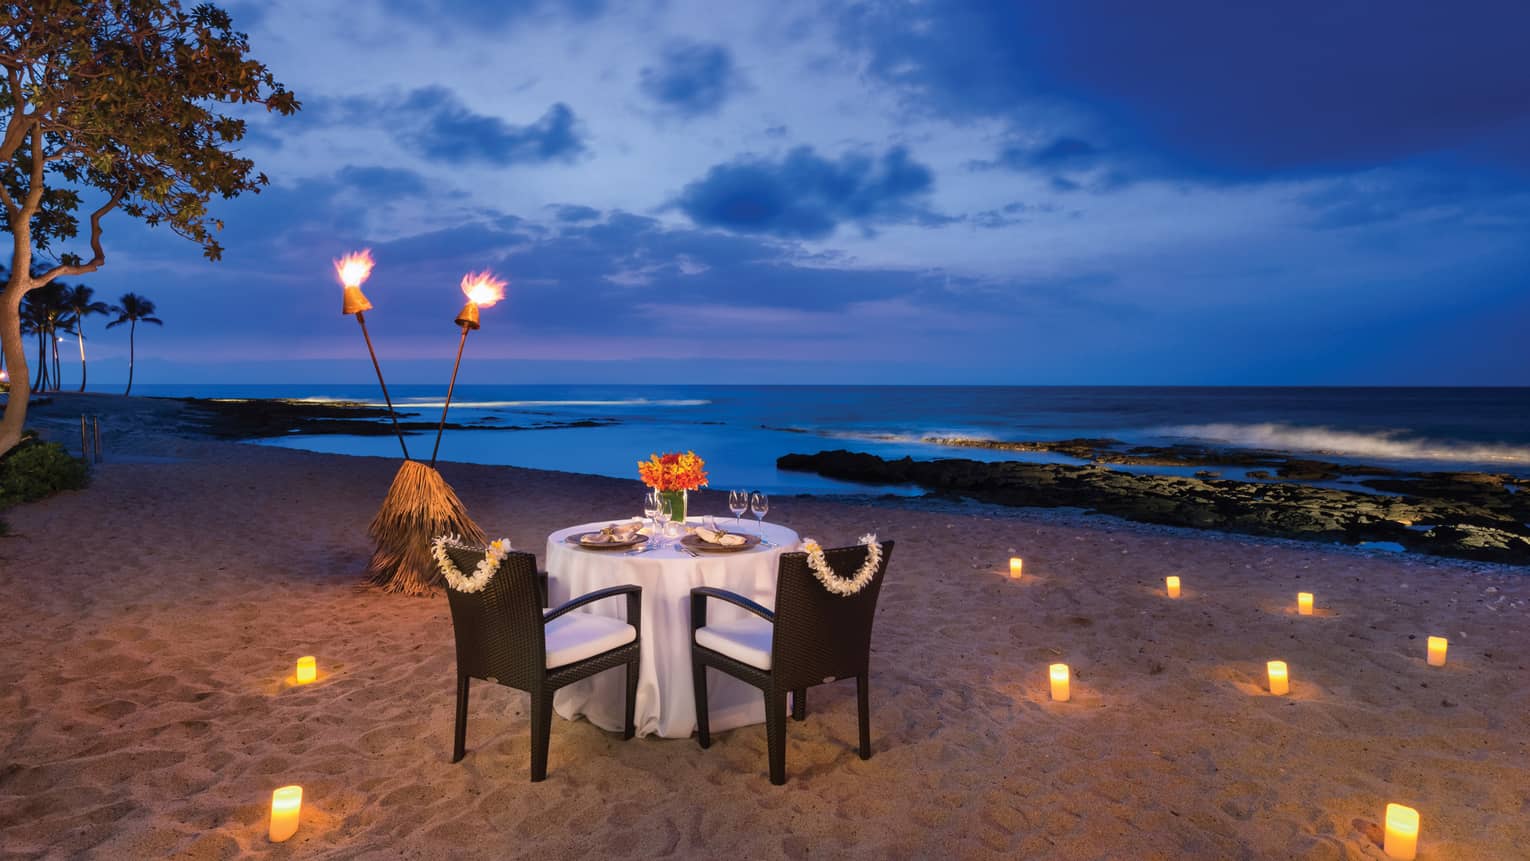 Couples dining table on sand beach with torches, glowing candles at night